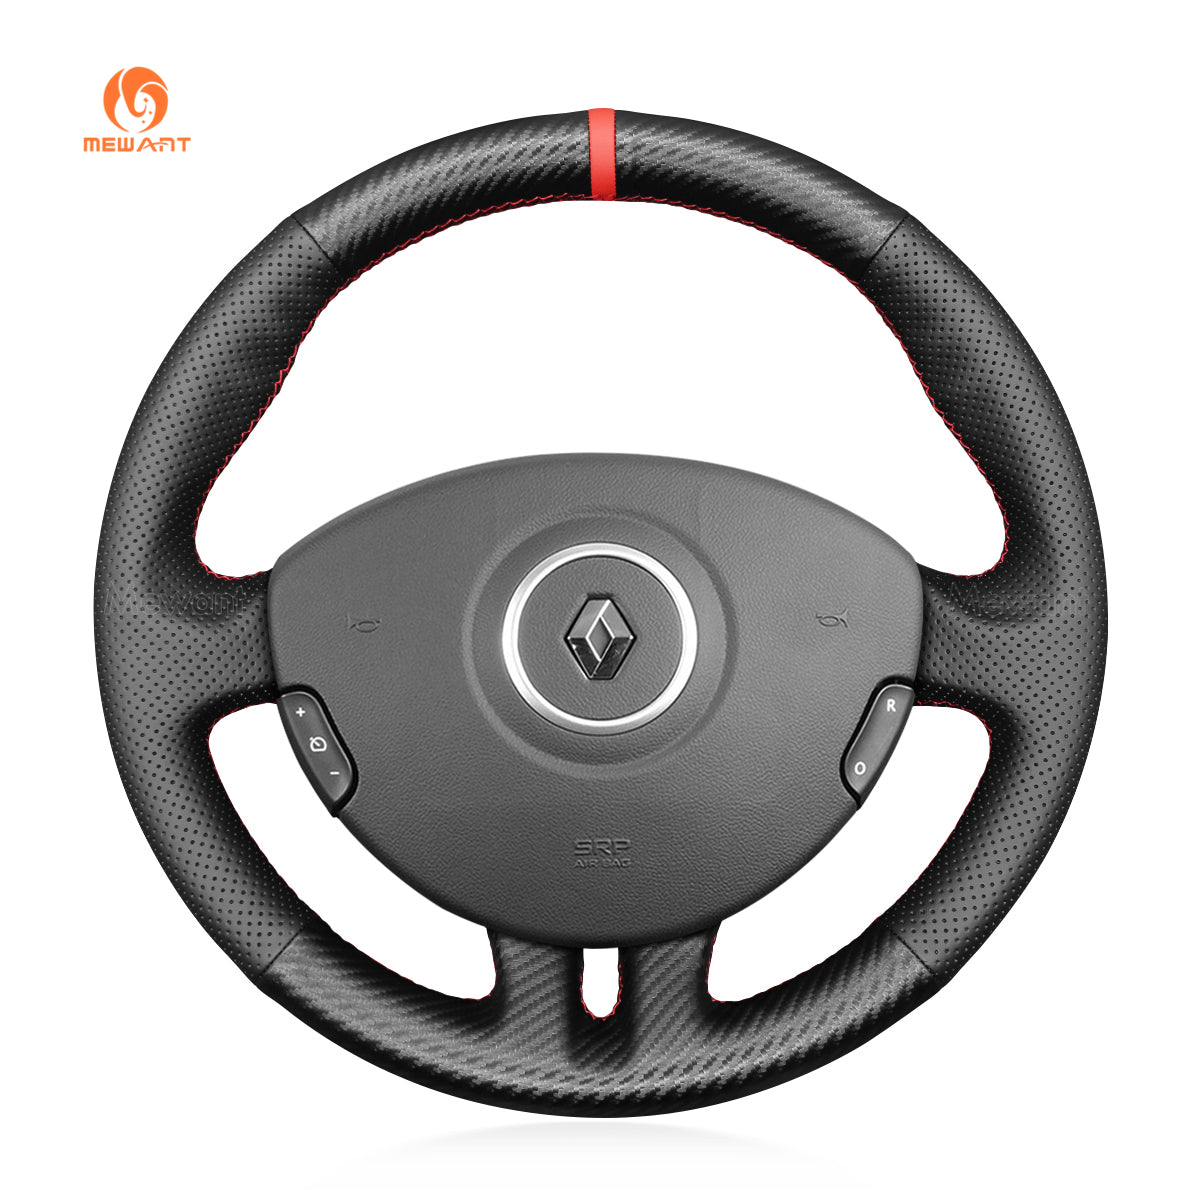 MEWANT Hand Stitch Black Leather Suede Car Steering Wheel Cover for Renault Clio 3 2005-2012